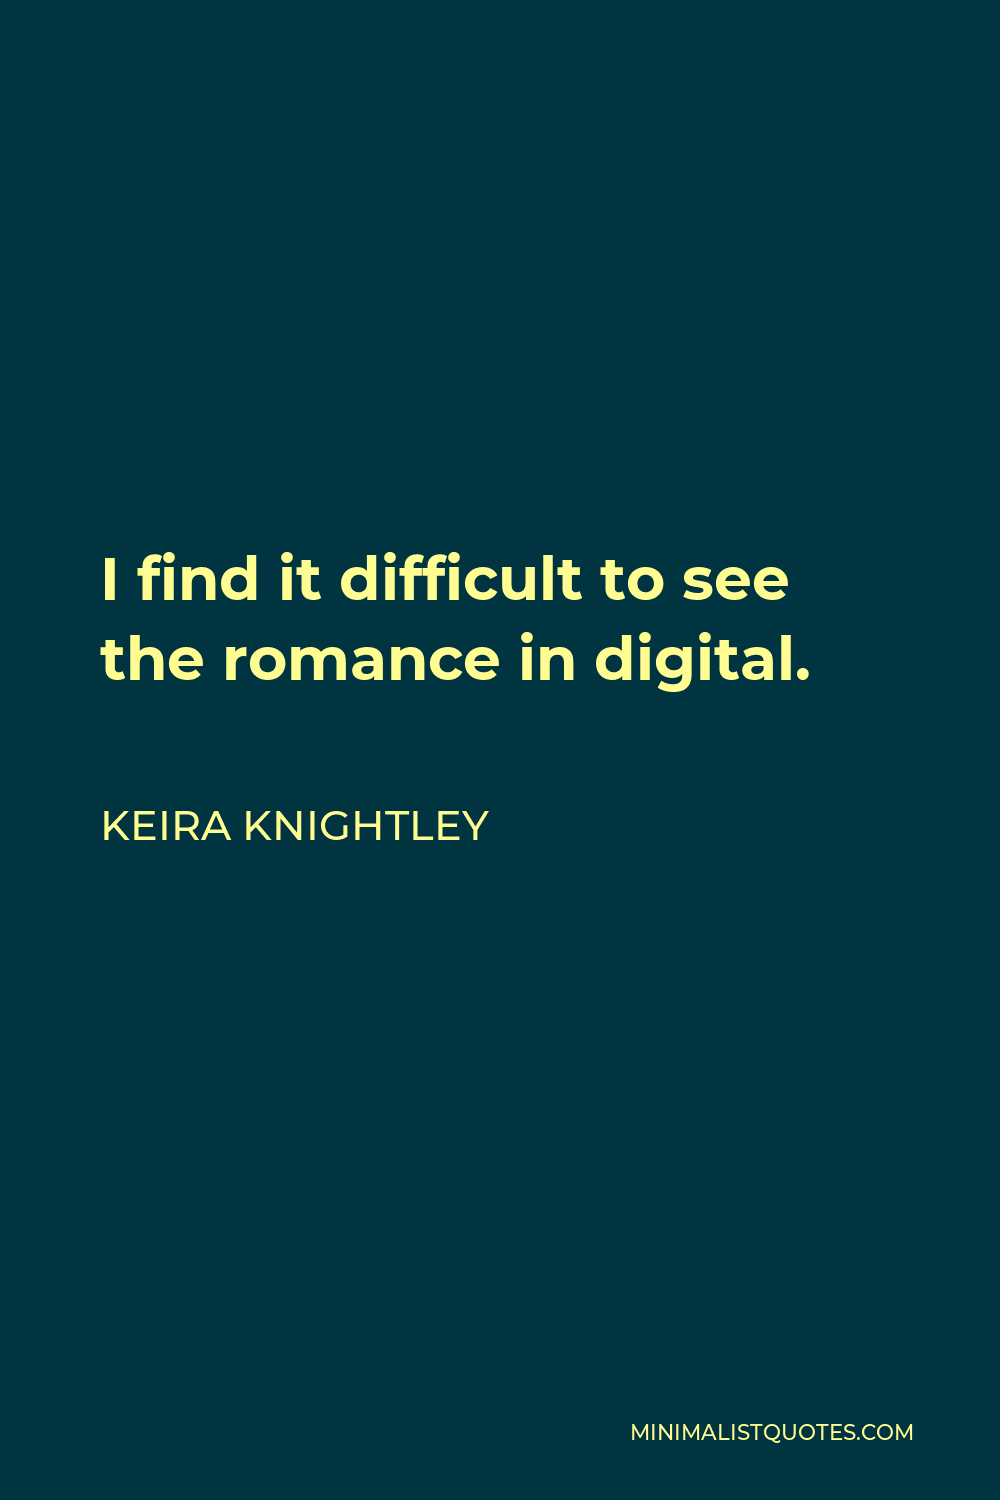 Keira Knightley Quote - I find it difficult to see the romance in digital.